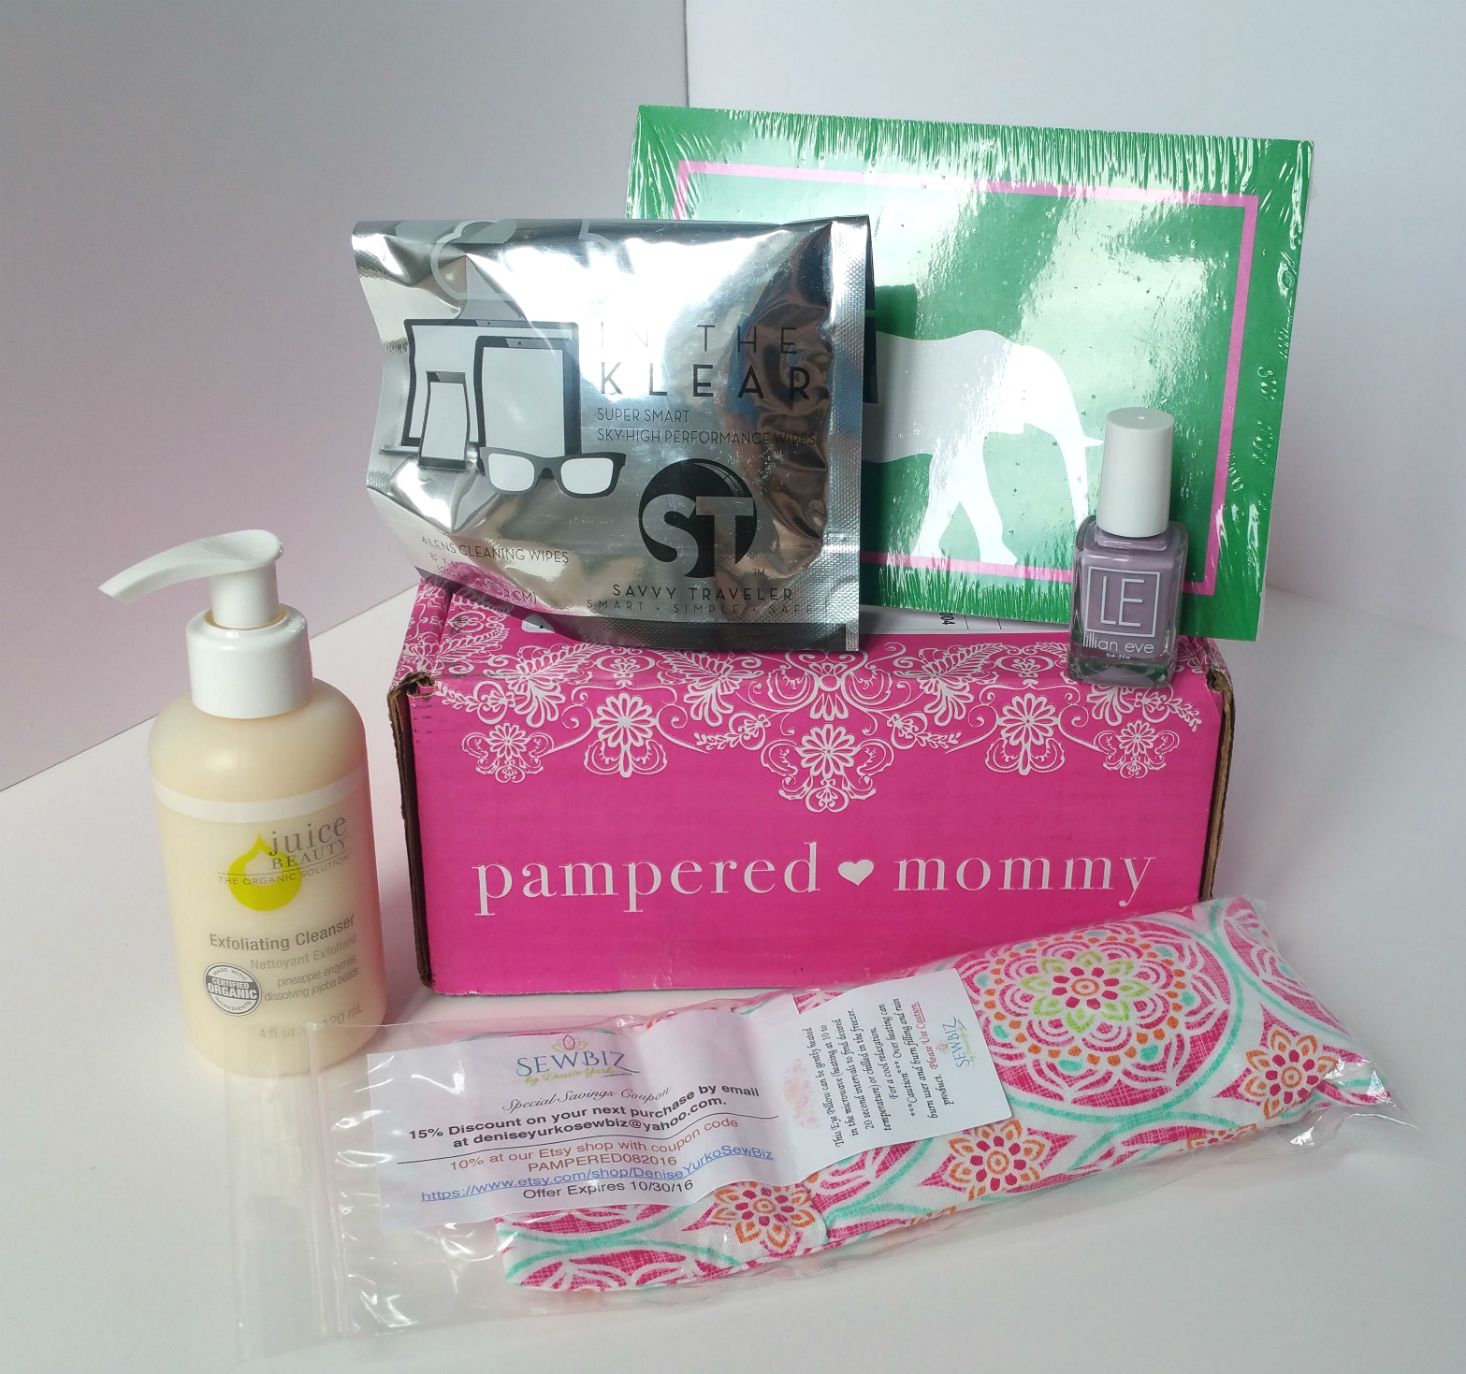 PAMPERED MOMMY AUGUST 2016 - all items